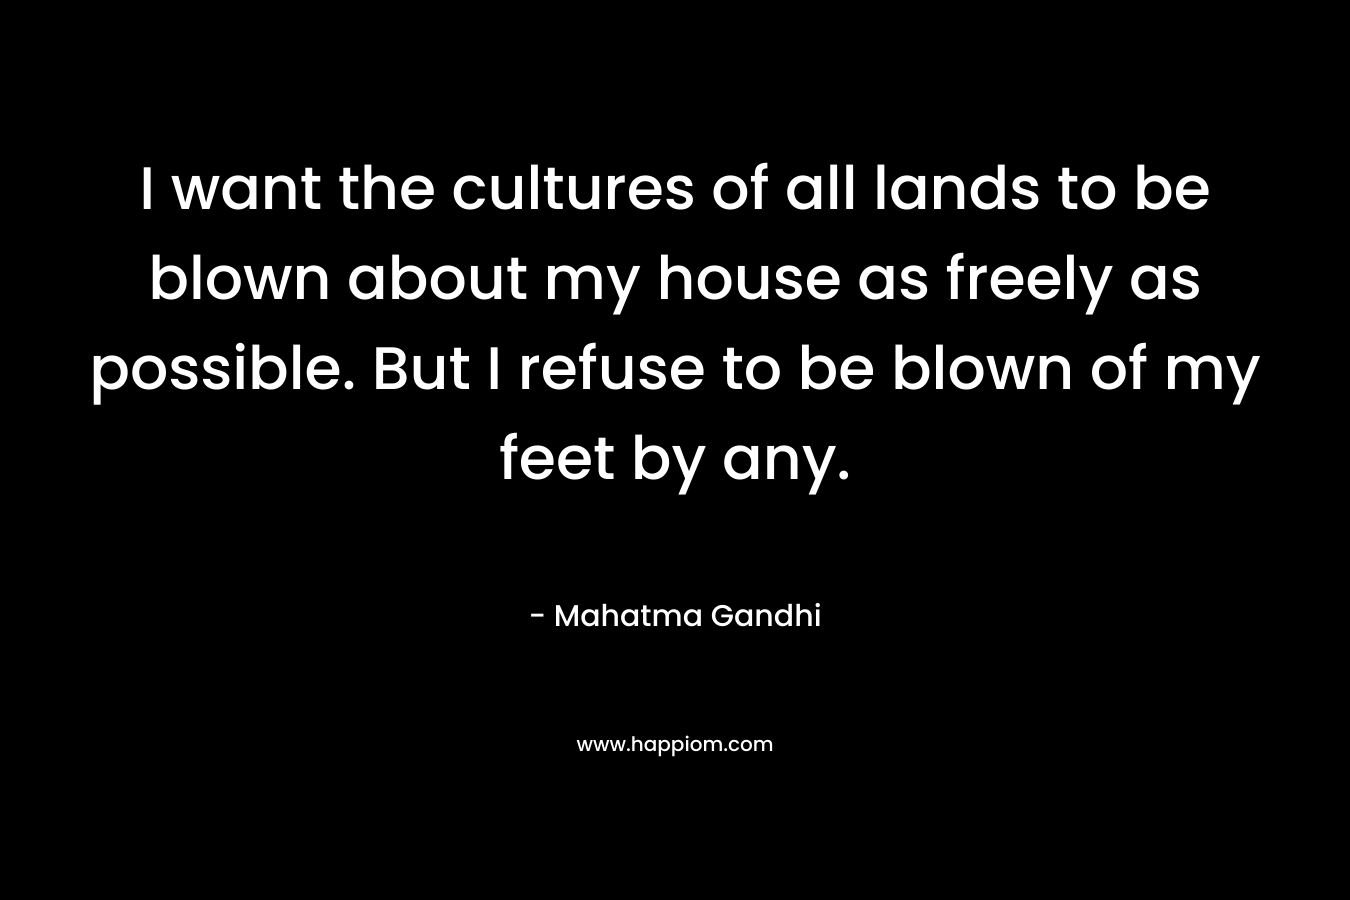 I want the cultures of all lands to be blown about my house as freely as possible. But I refuse to be blown of my feet by any. – Mahatma Gandhi